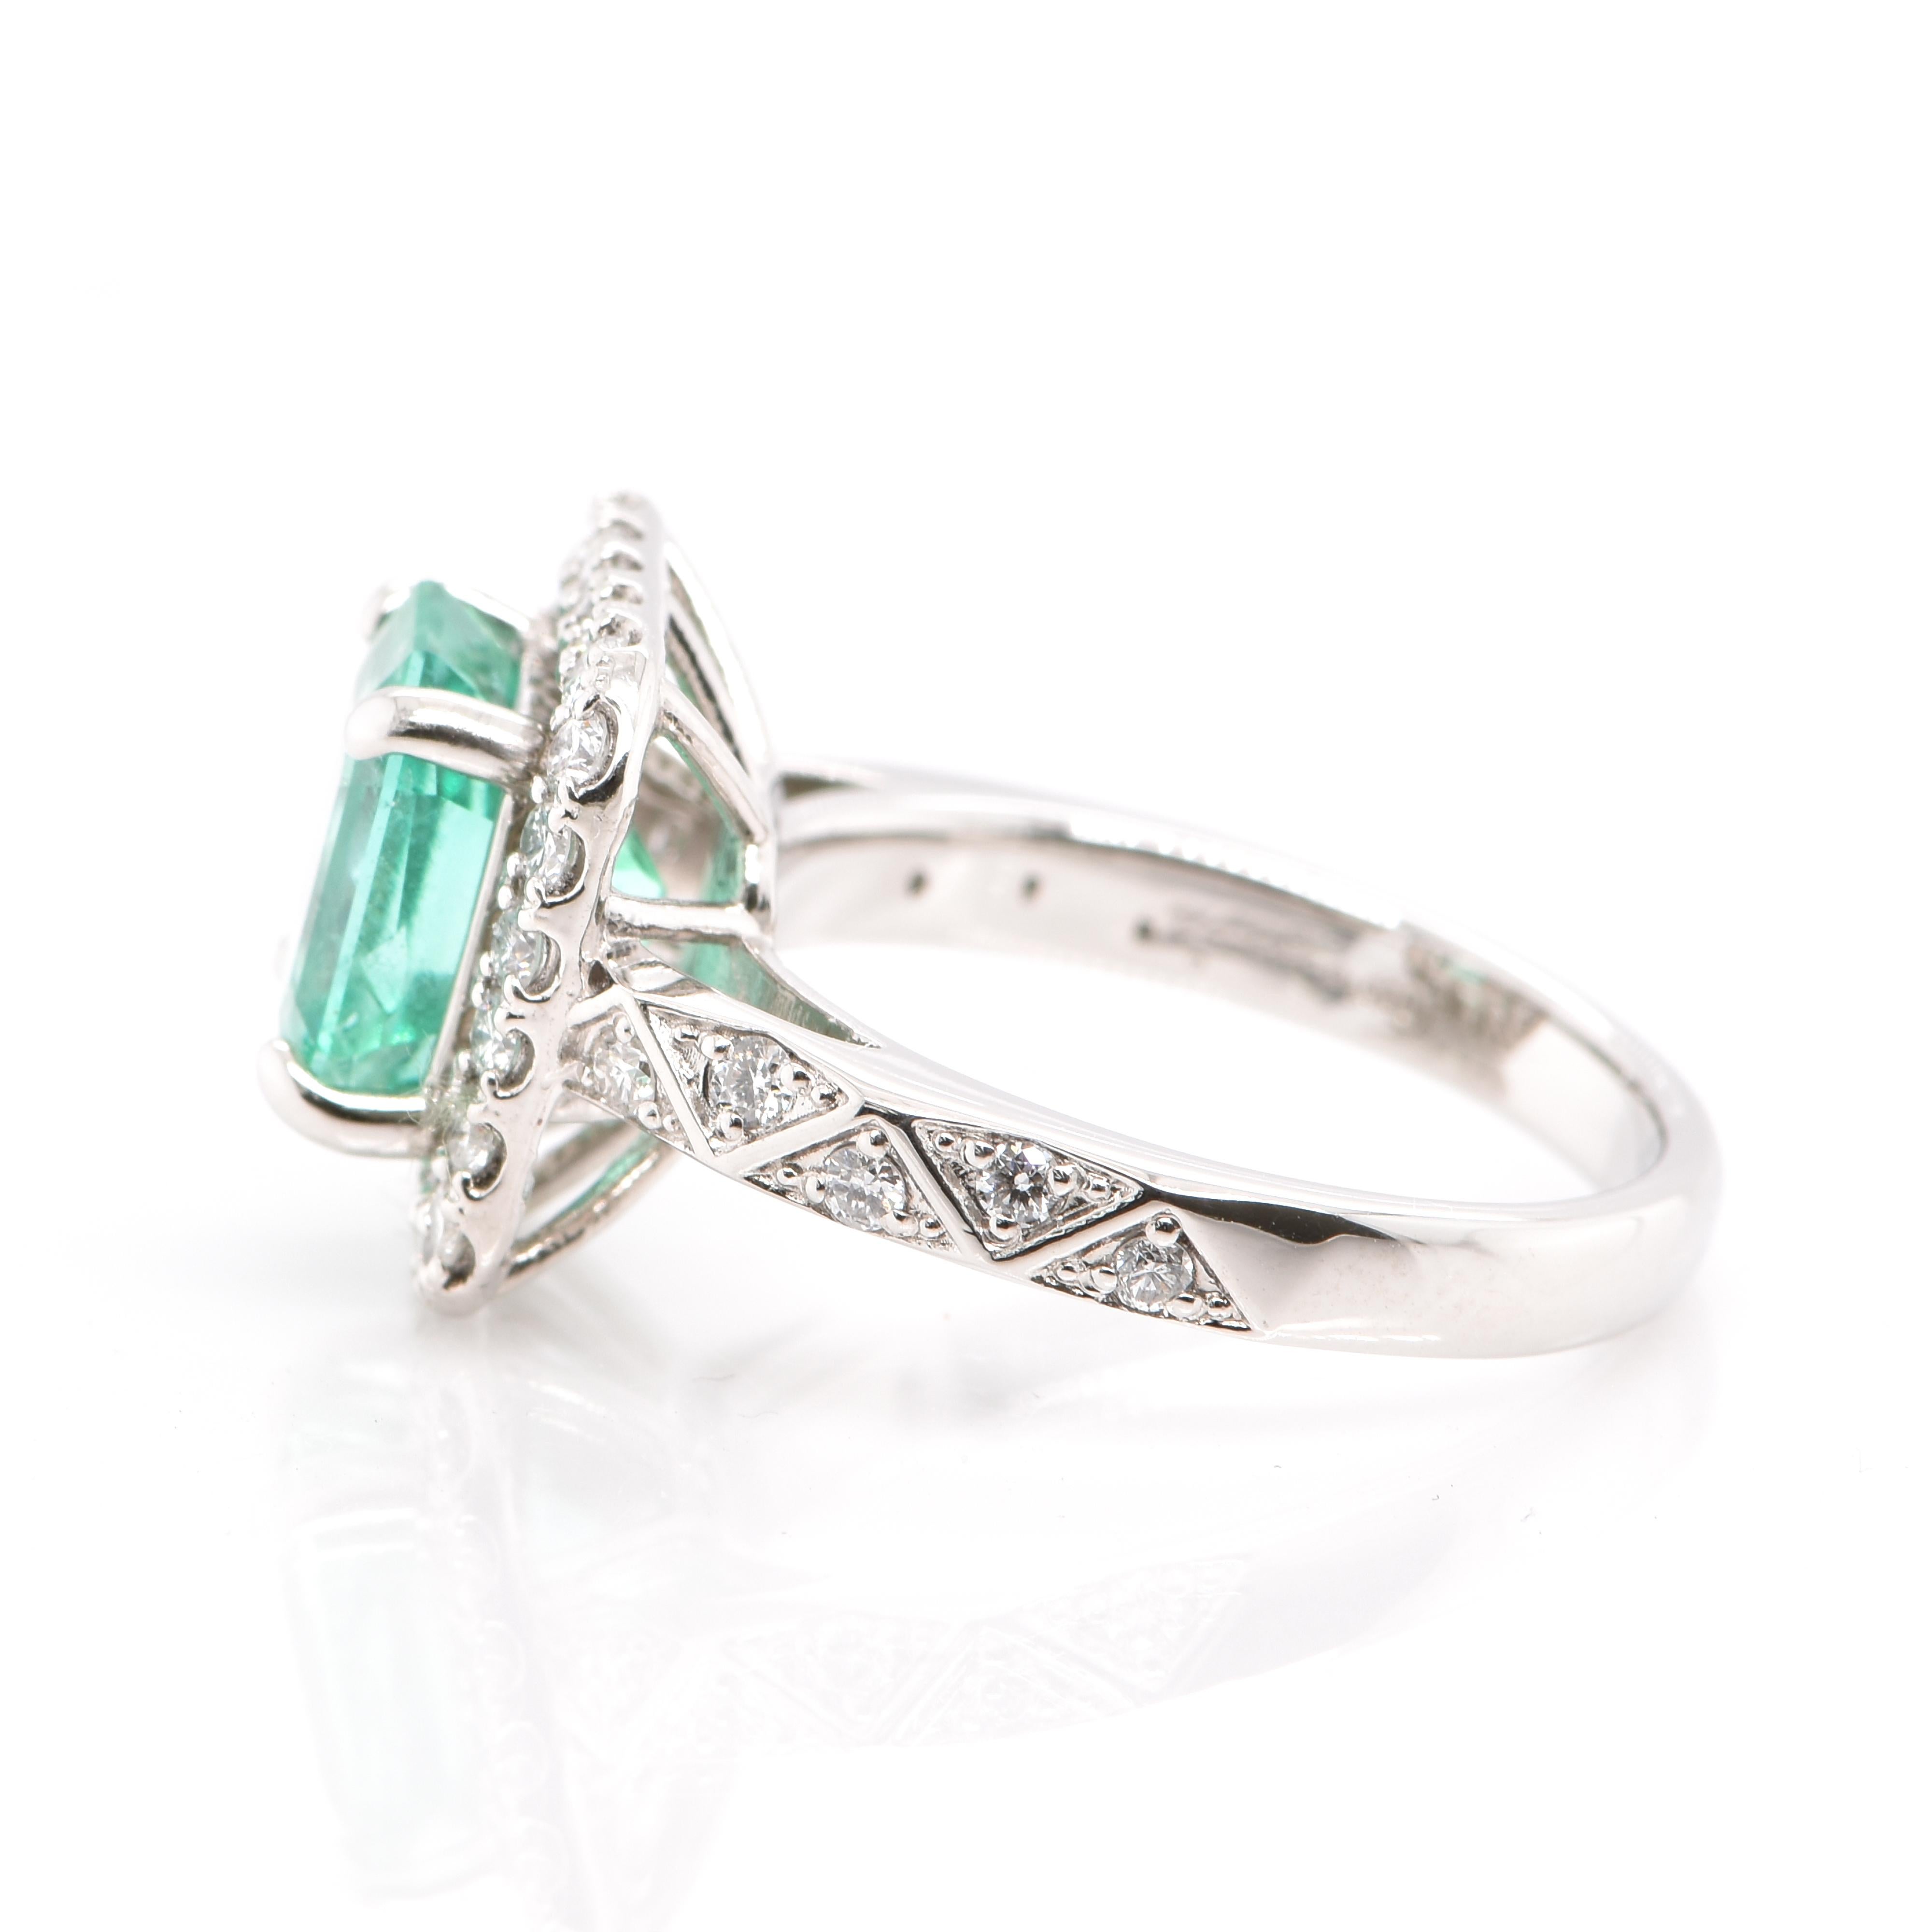 Emerald Cut 2.48 Carat, Natural, Colombian Emerald and Diamond Ring Set in Platinum